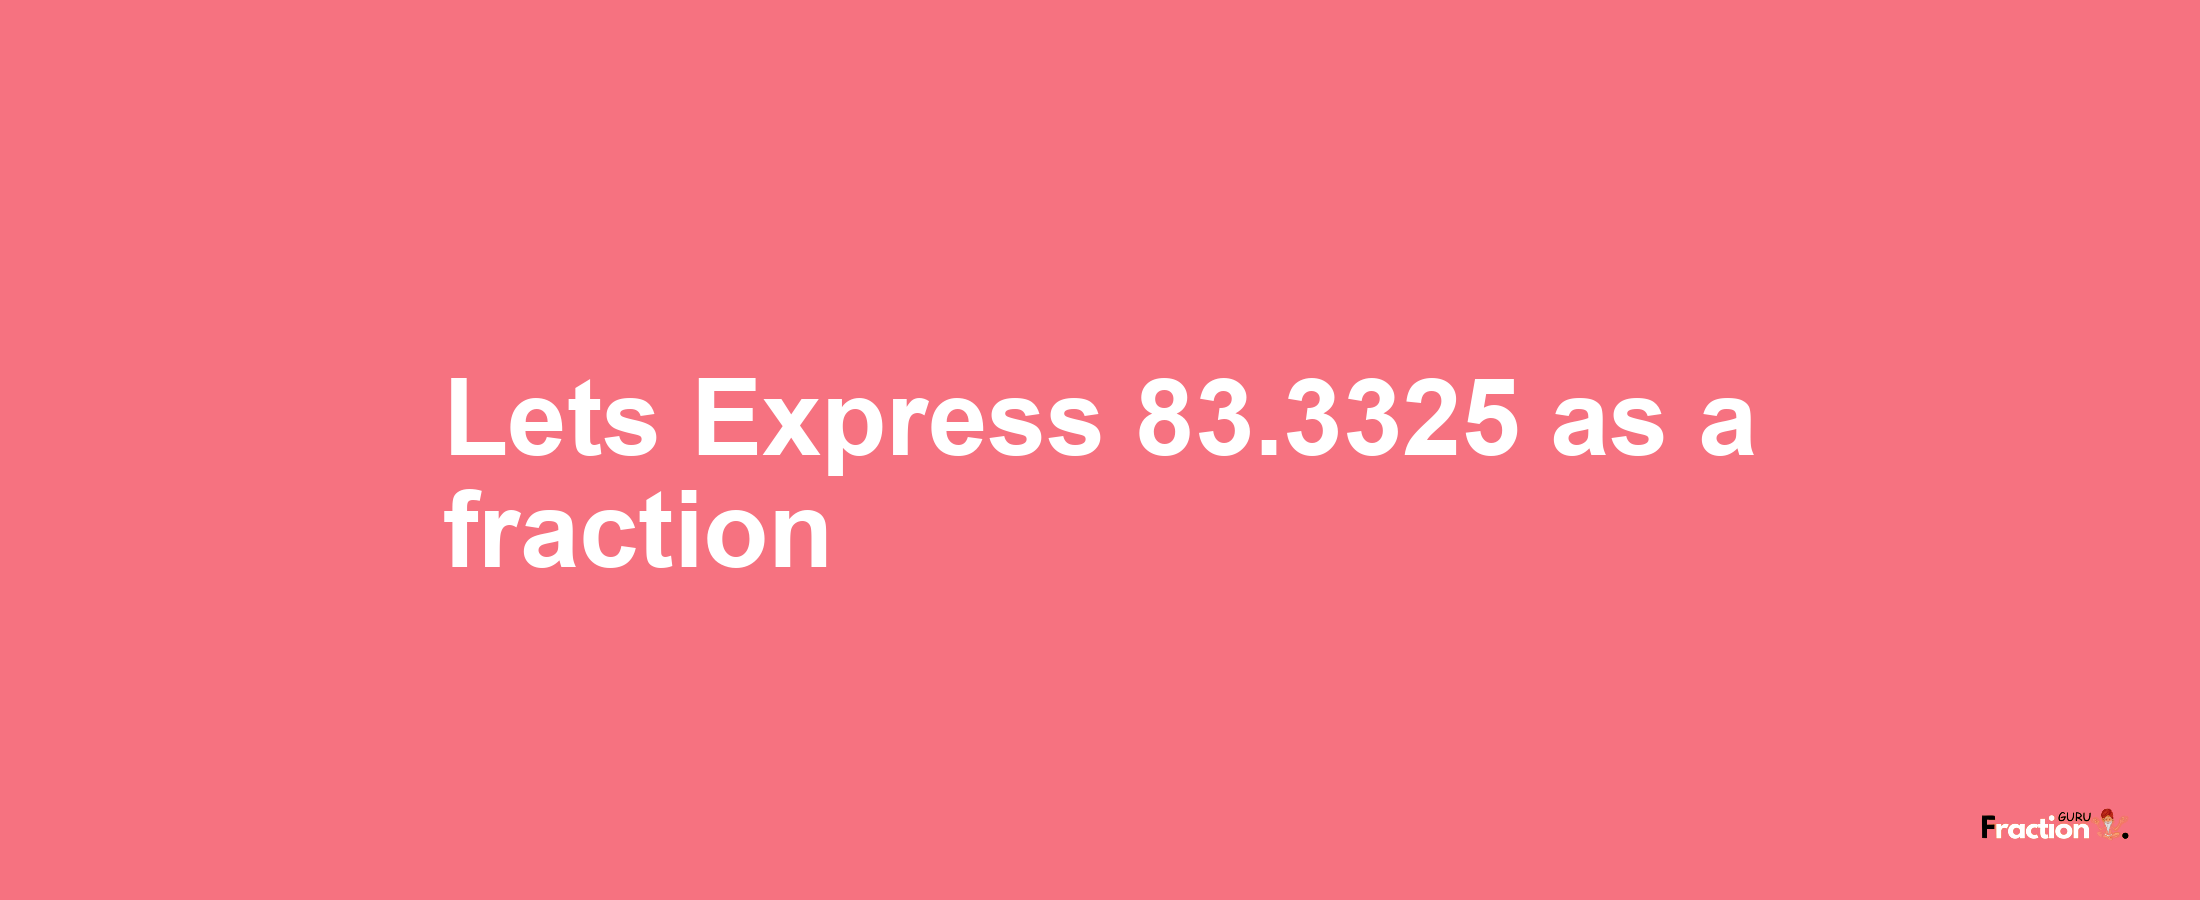 Lets Express 83.3325 as afraction